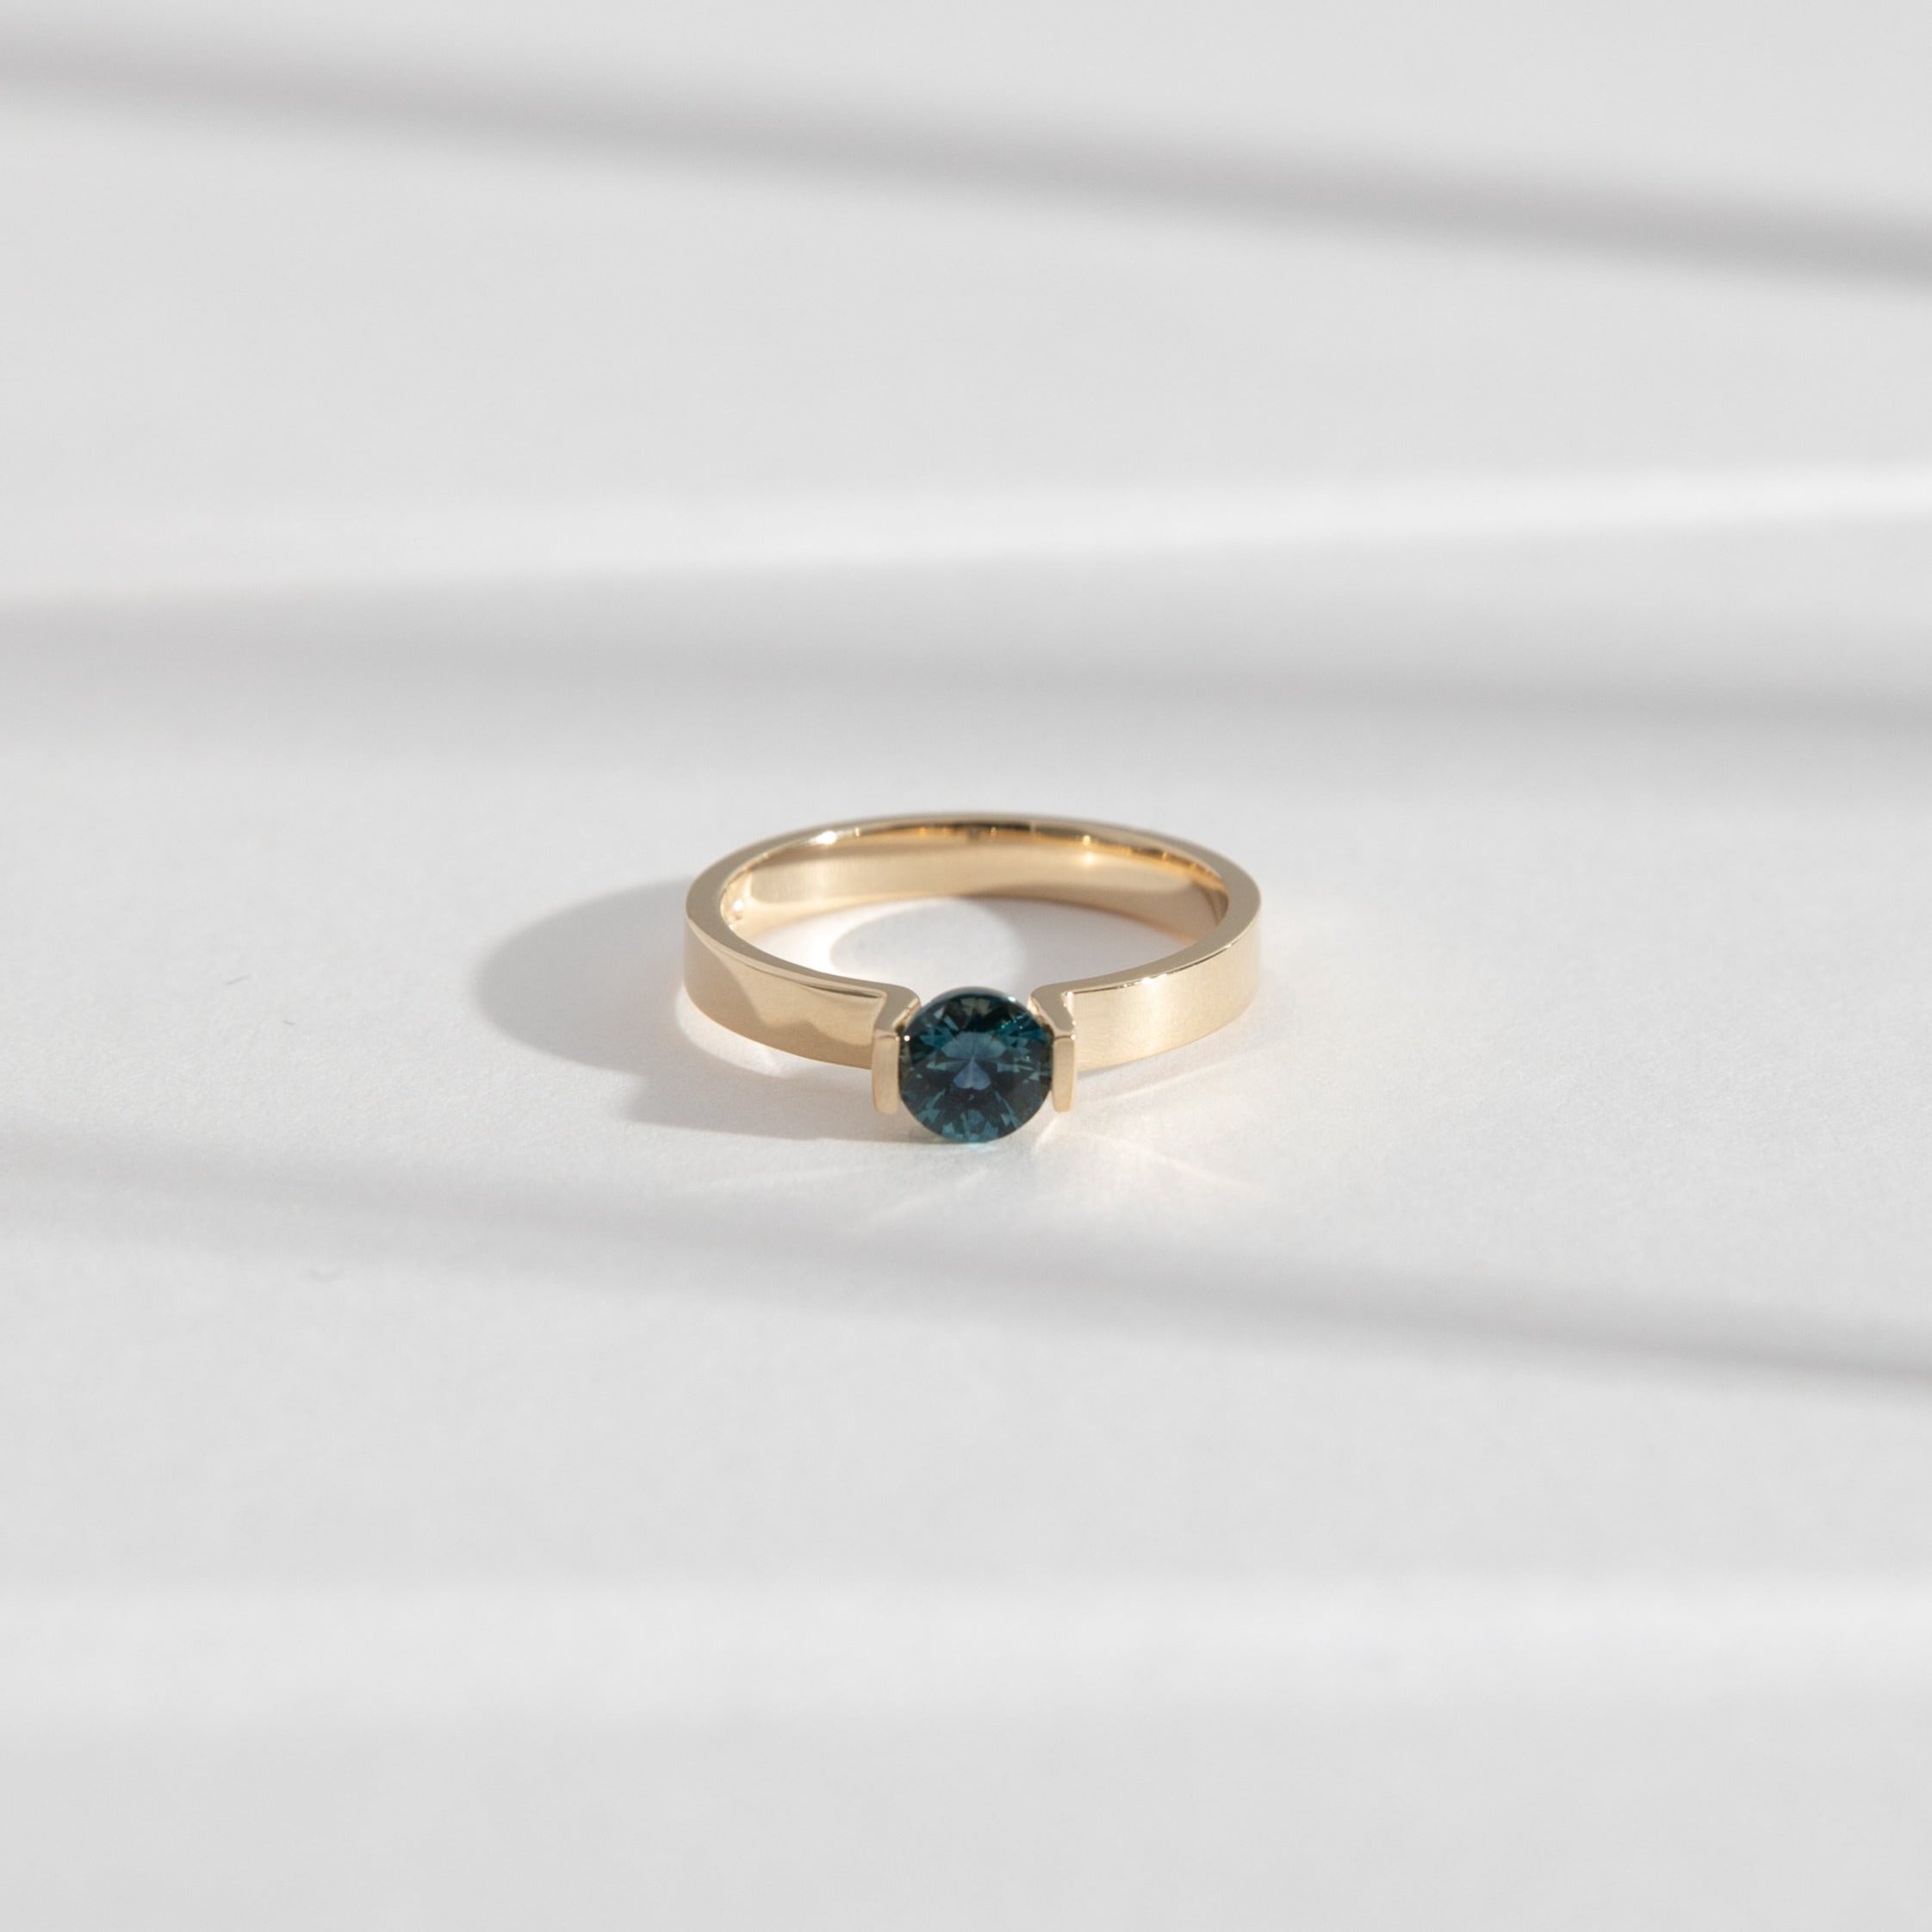 Lara Alternative Ring in 14k Gold set with a 0.59ct round brilliant cut dark teal sapphire By SHW Fine Jewelry NYC